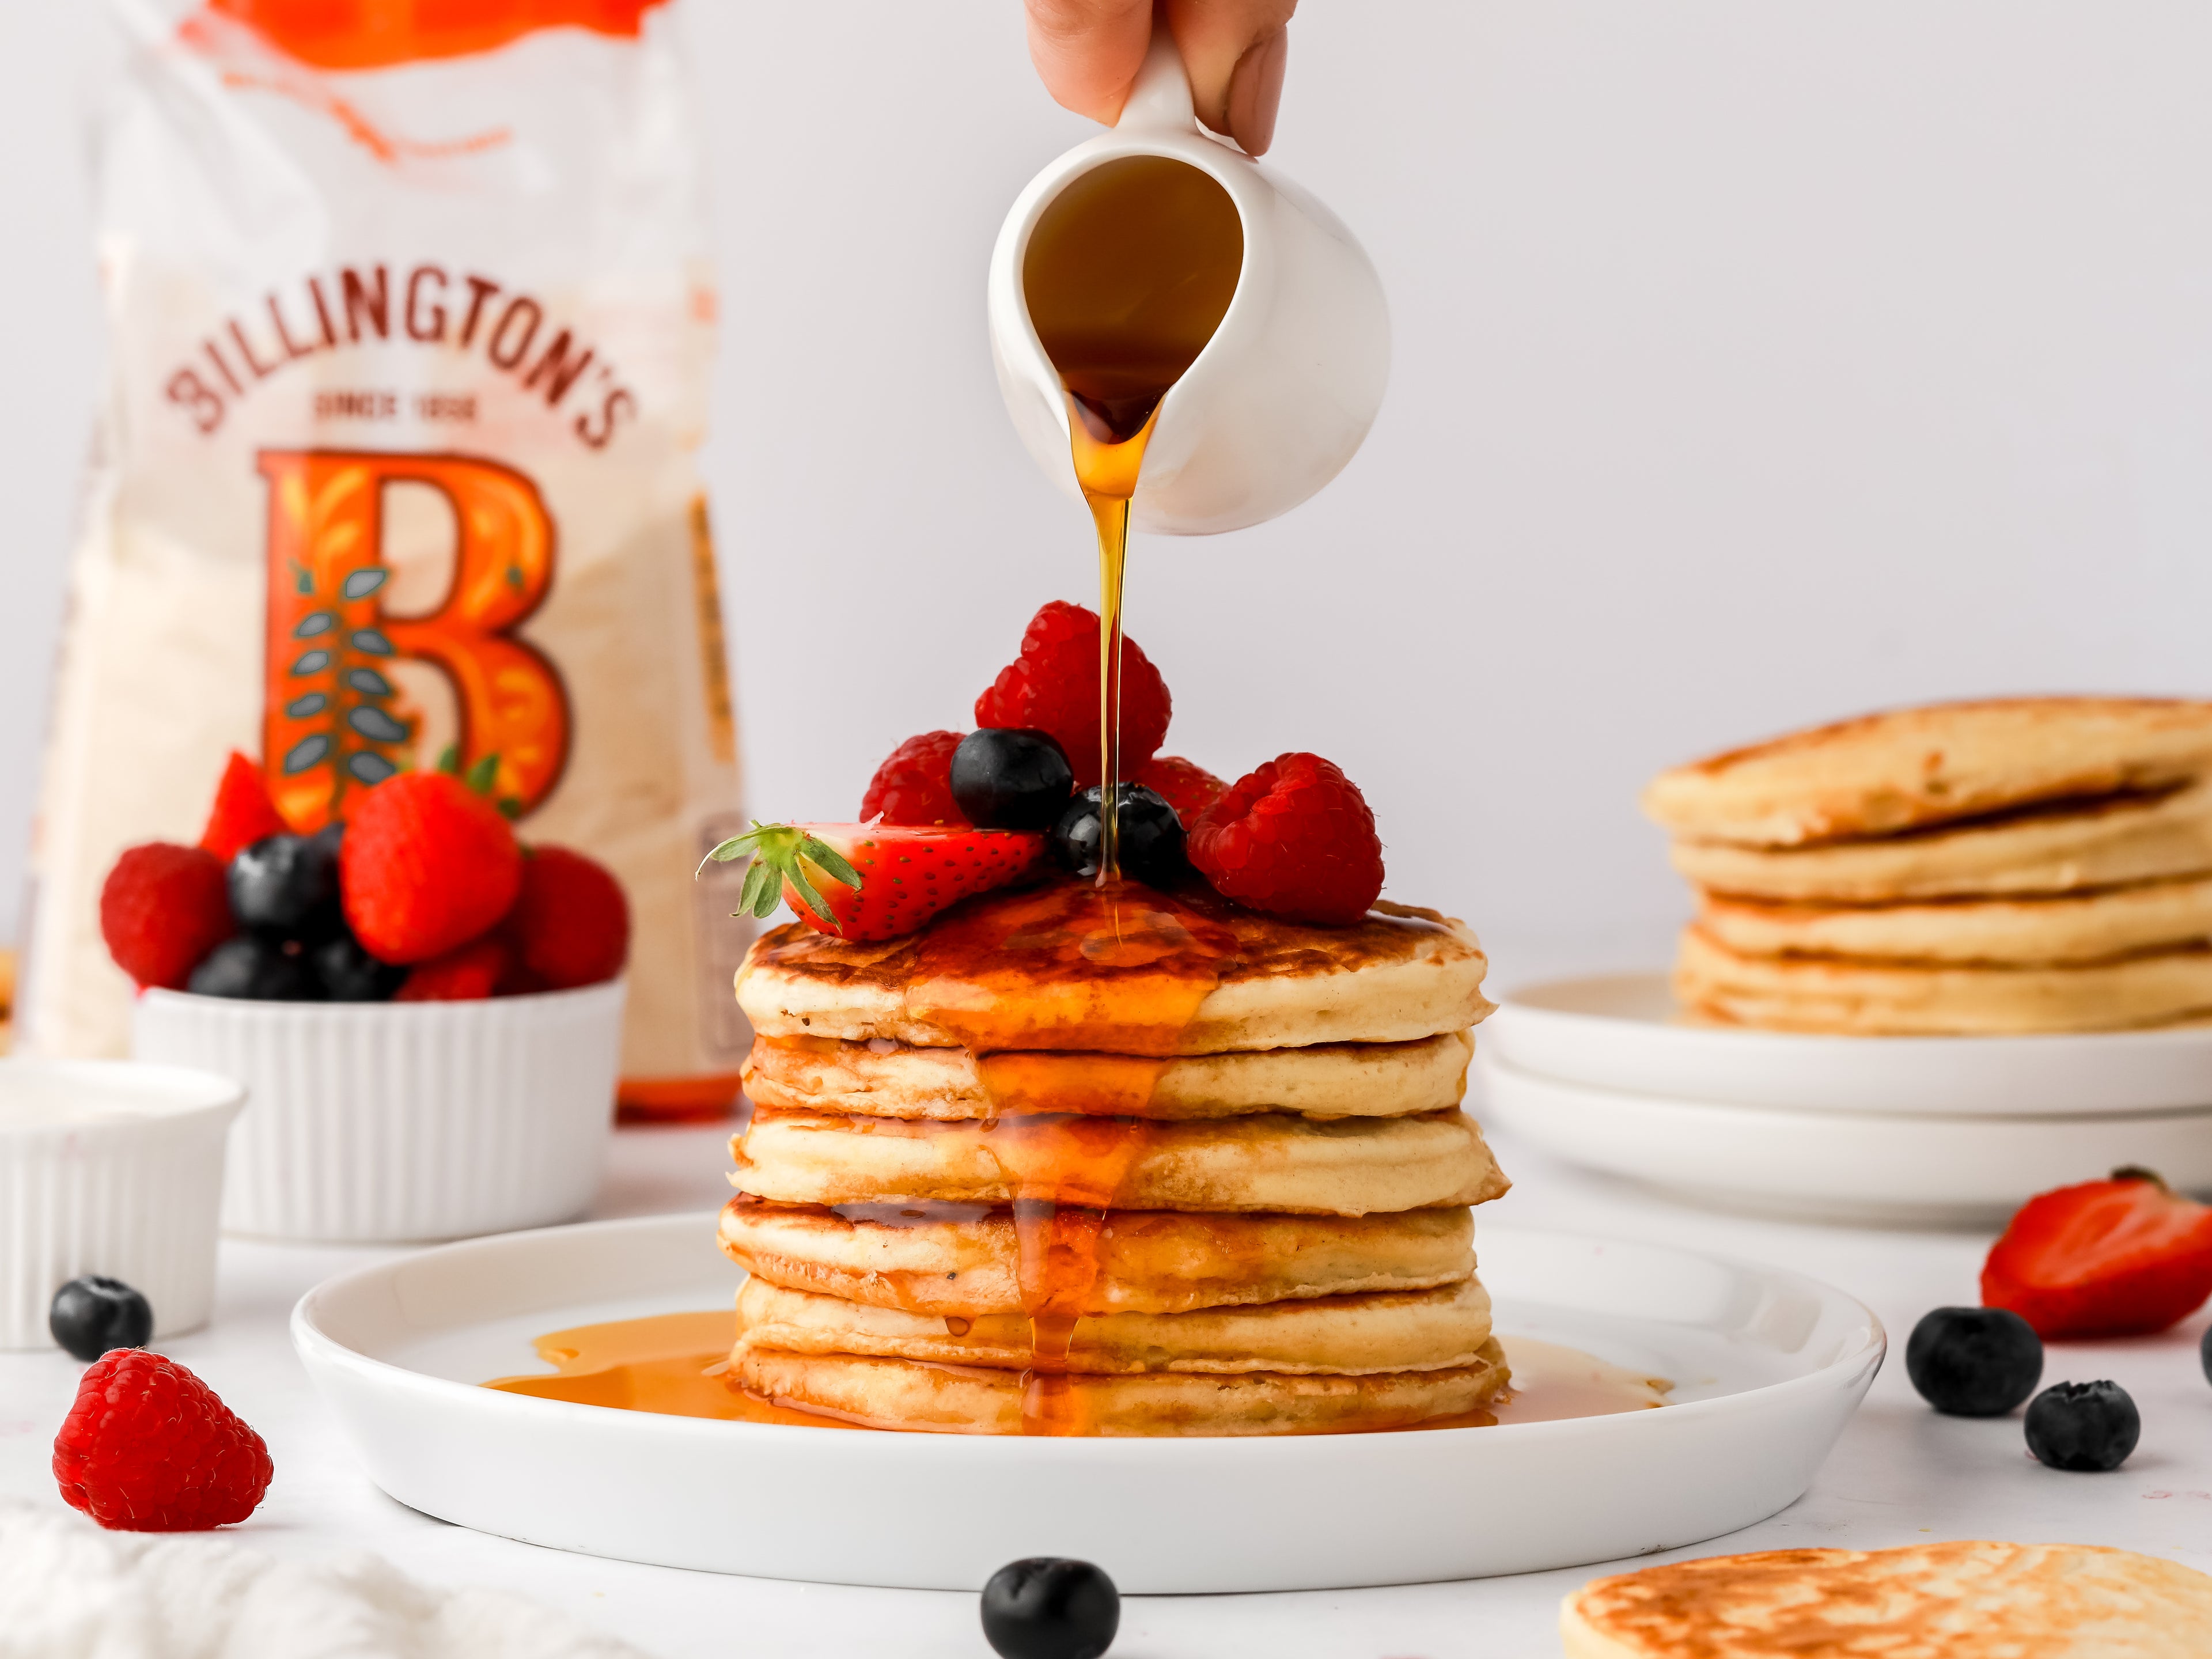 Syrup being poured on top of a stack of pancakes with fresh fruit on